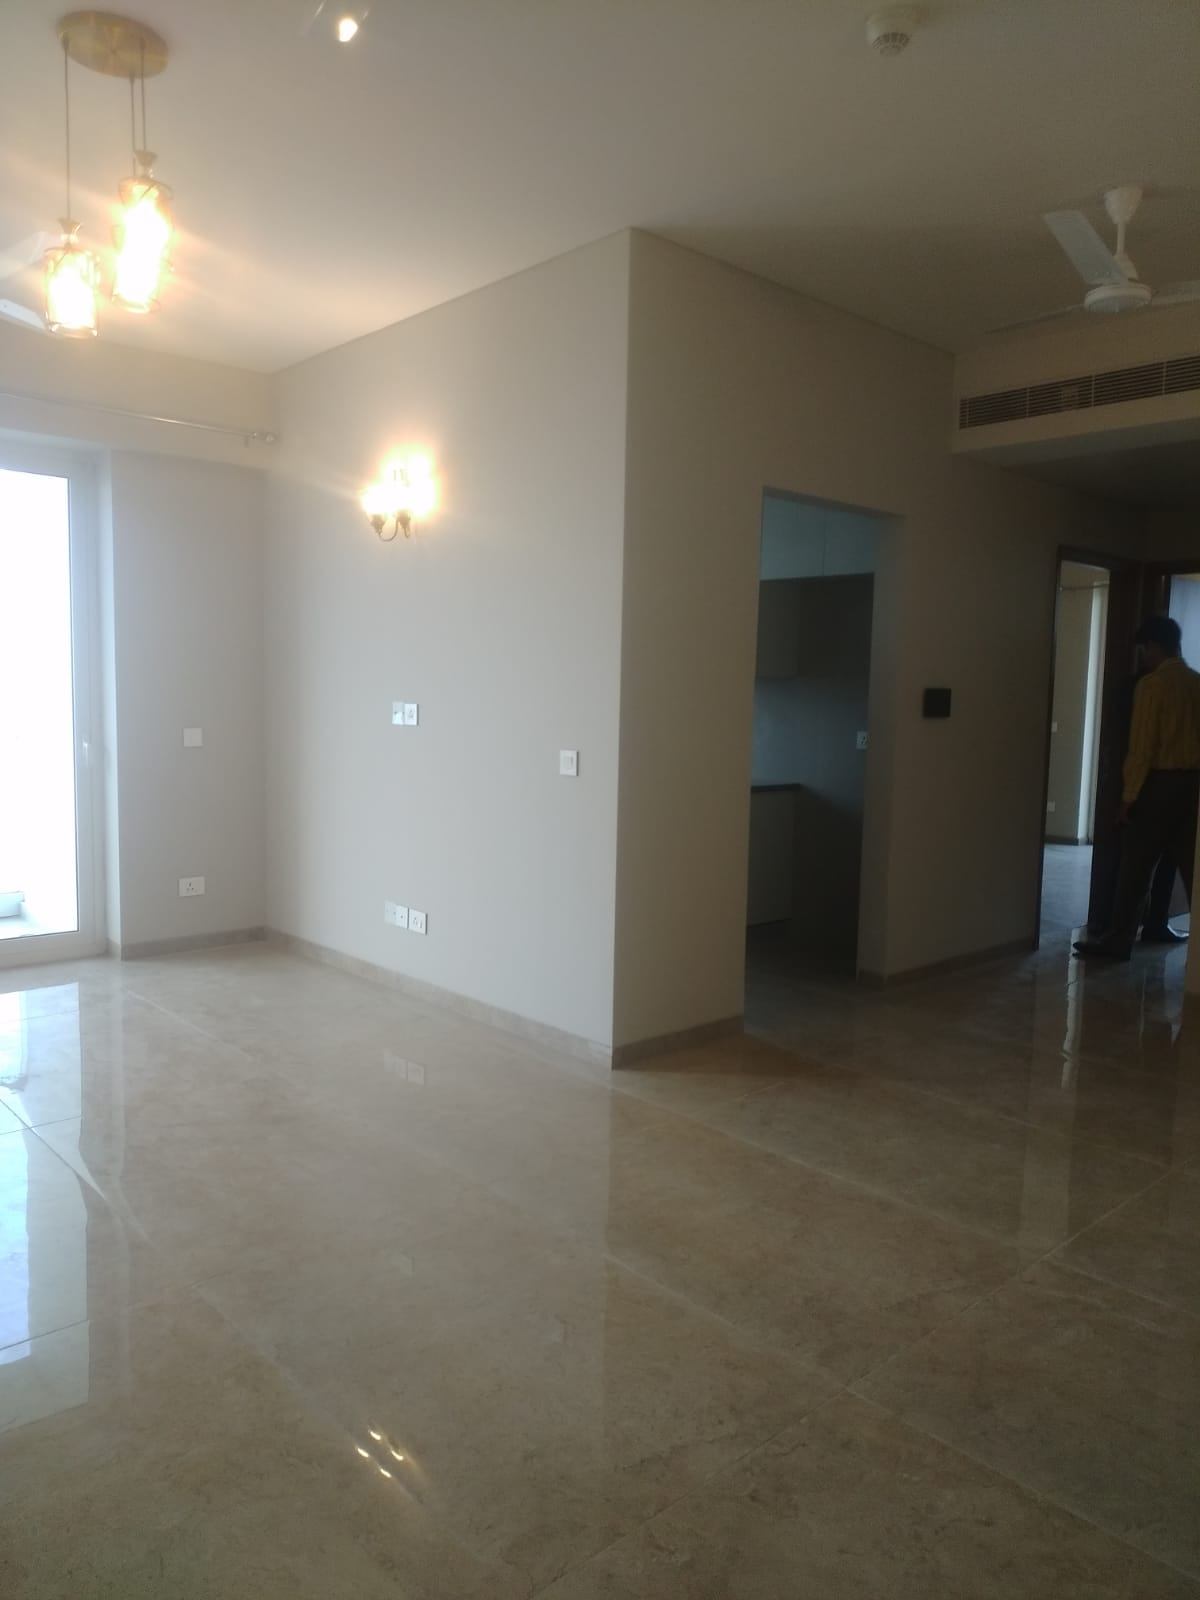 2 Bed/ 2 Bath Rent Apartment/ Flat; 1,300 sq. ft. carpet area, Semi Furnished for rent @Sector 62